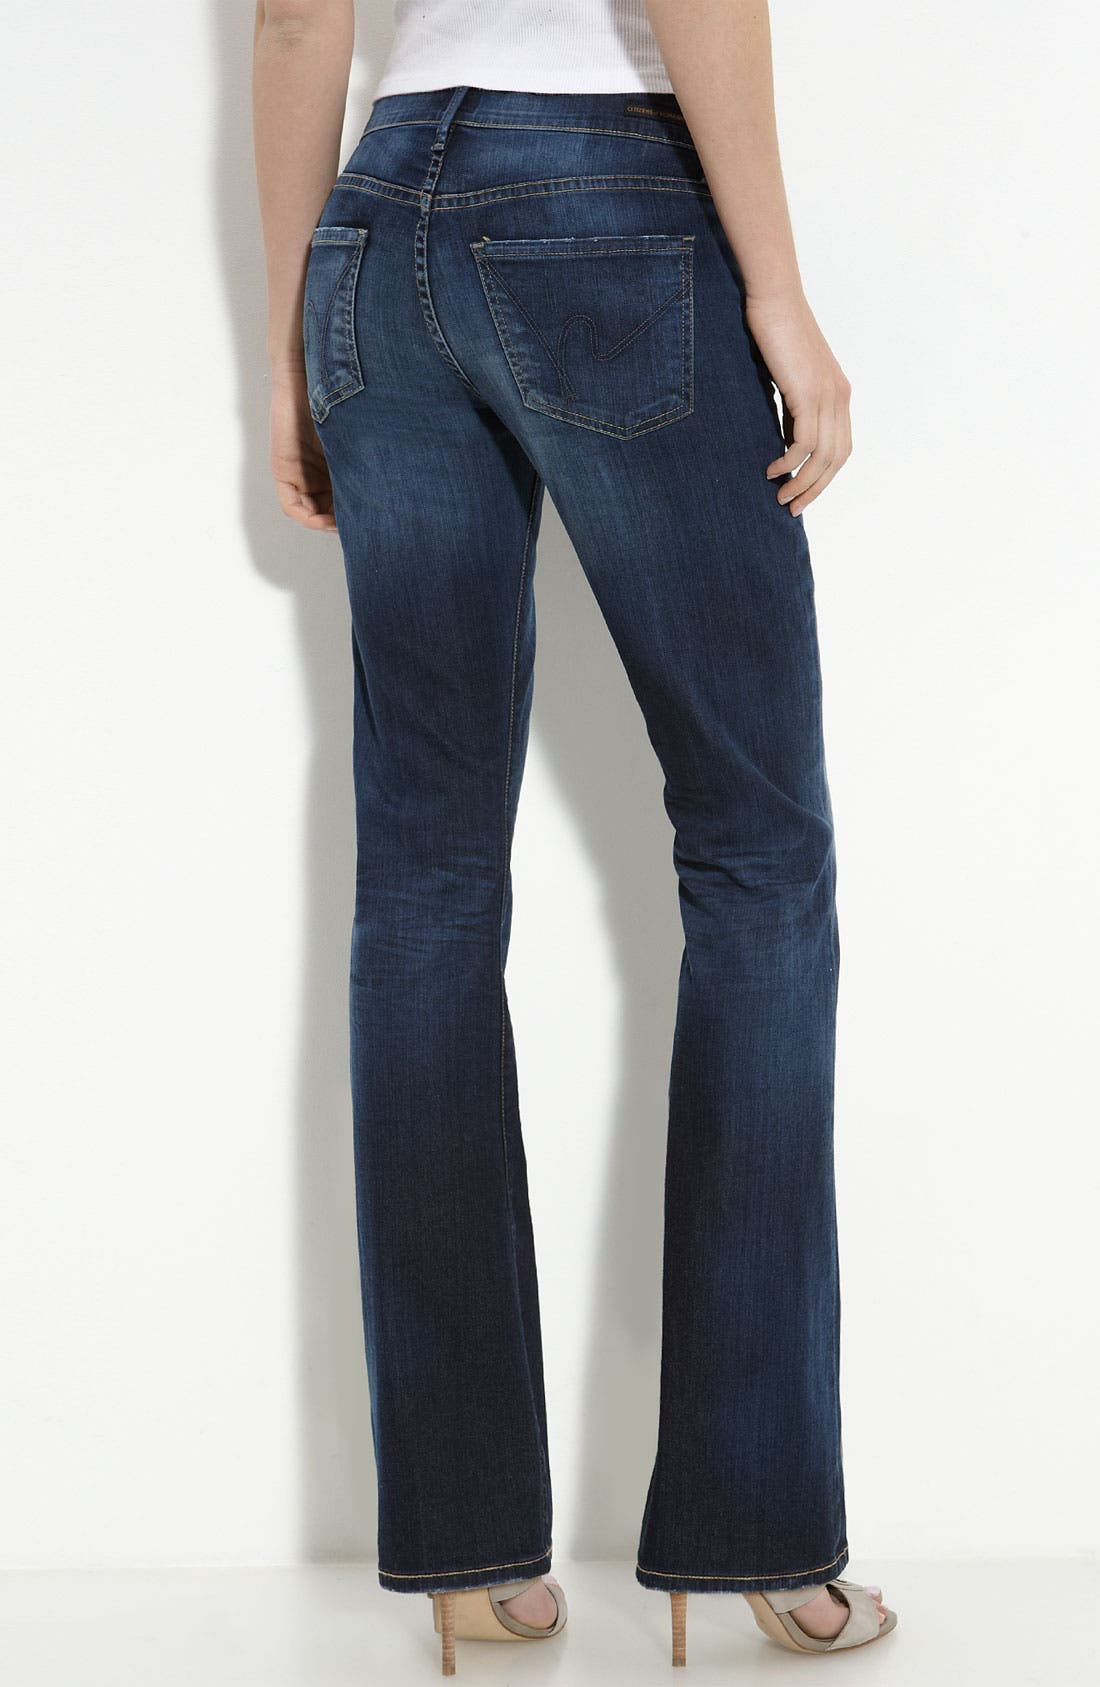 citizens of humanity petite bootcut